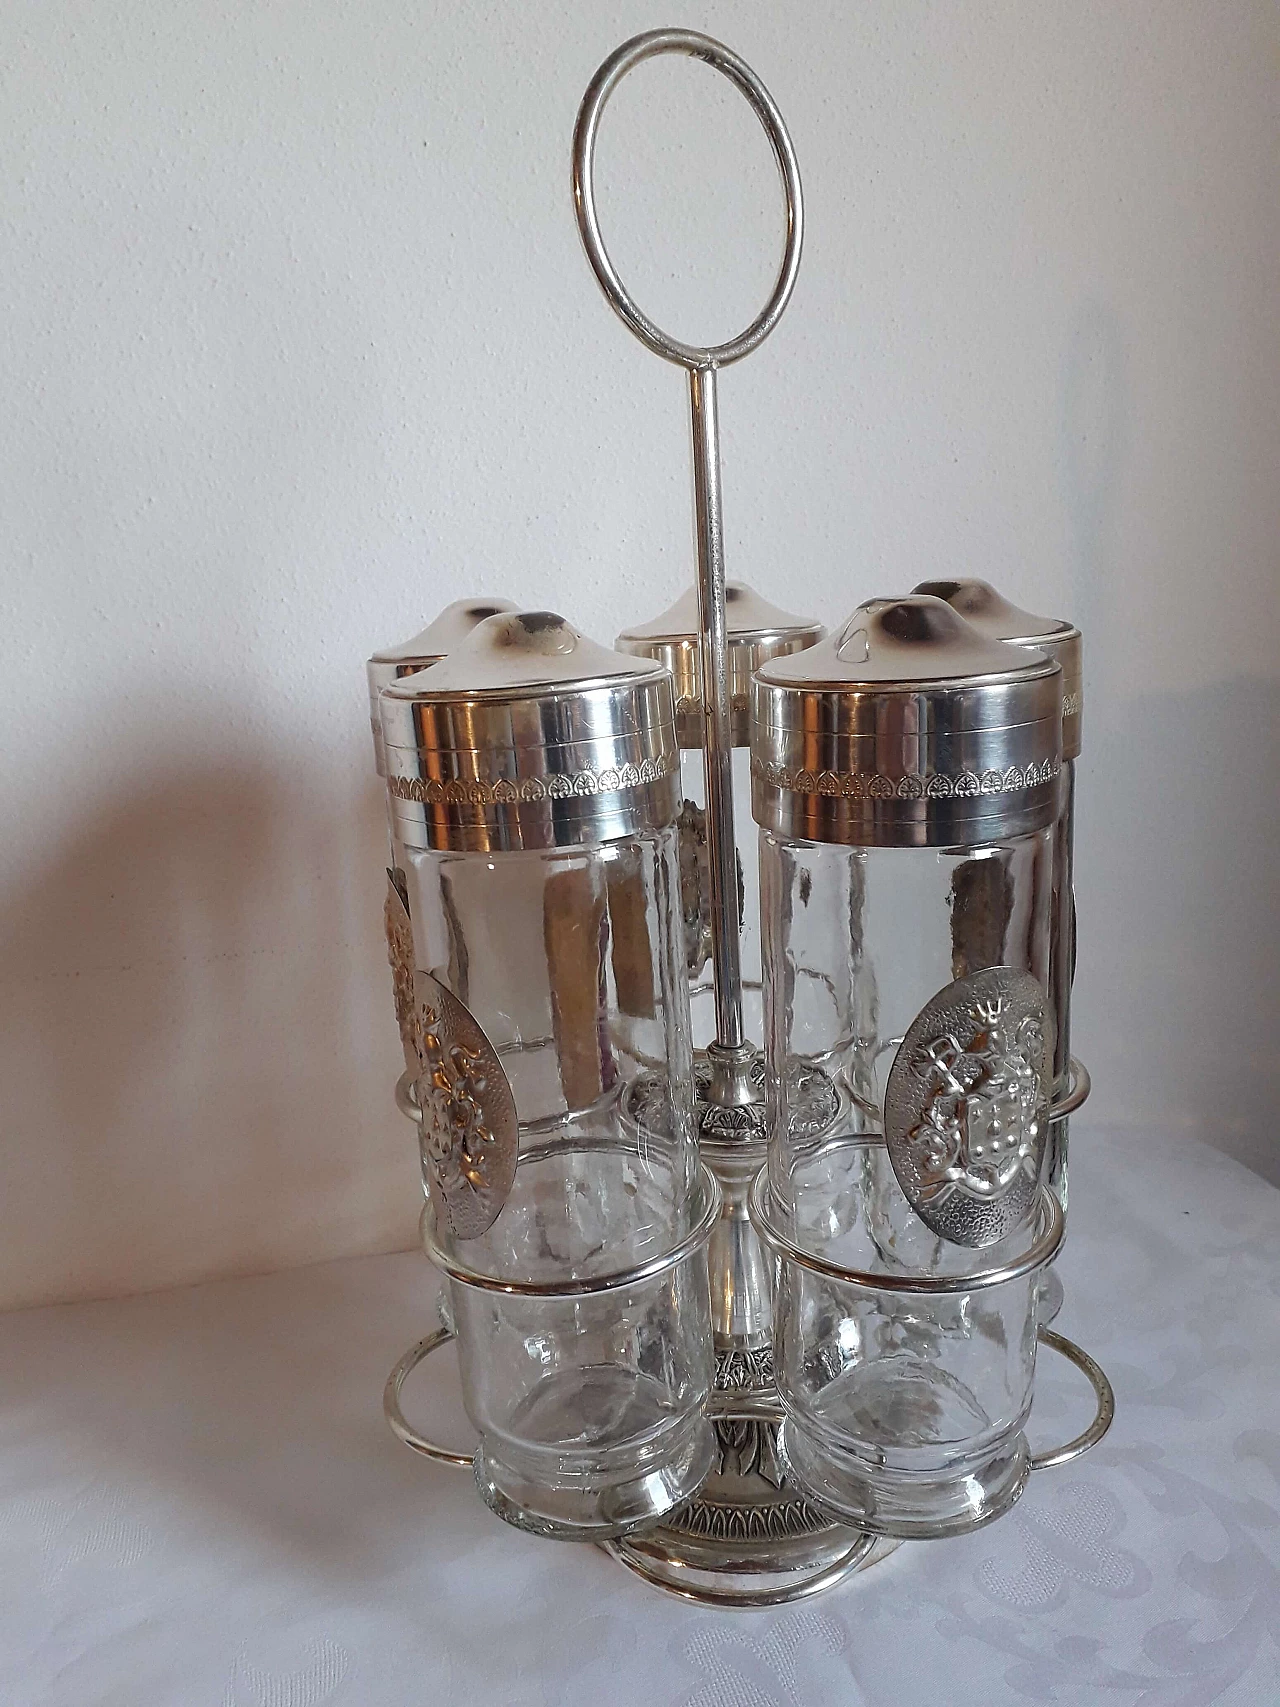 Toschi glass and silver containers for fruit in alcohol, 1960s 1470196